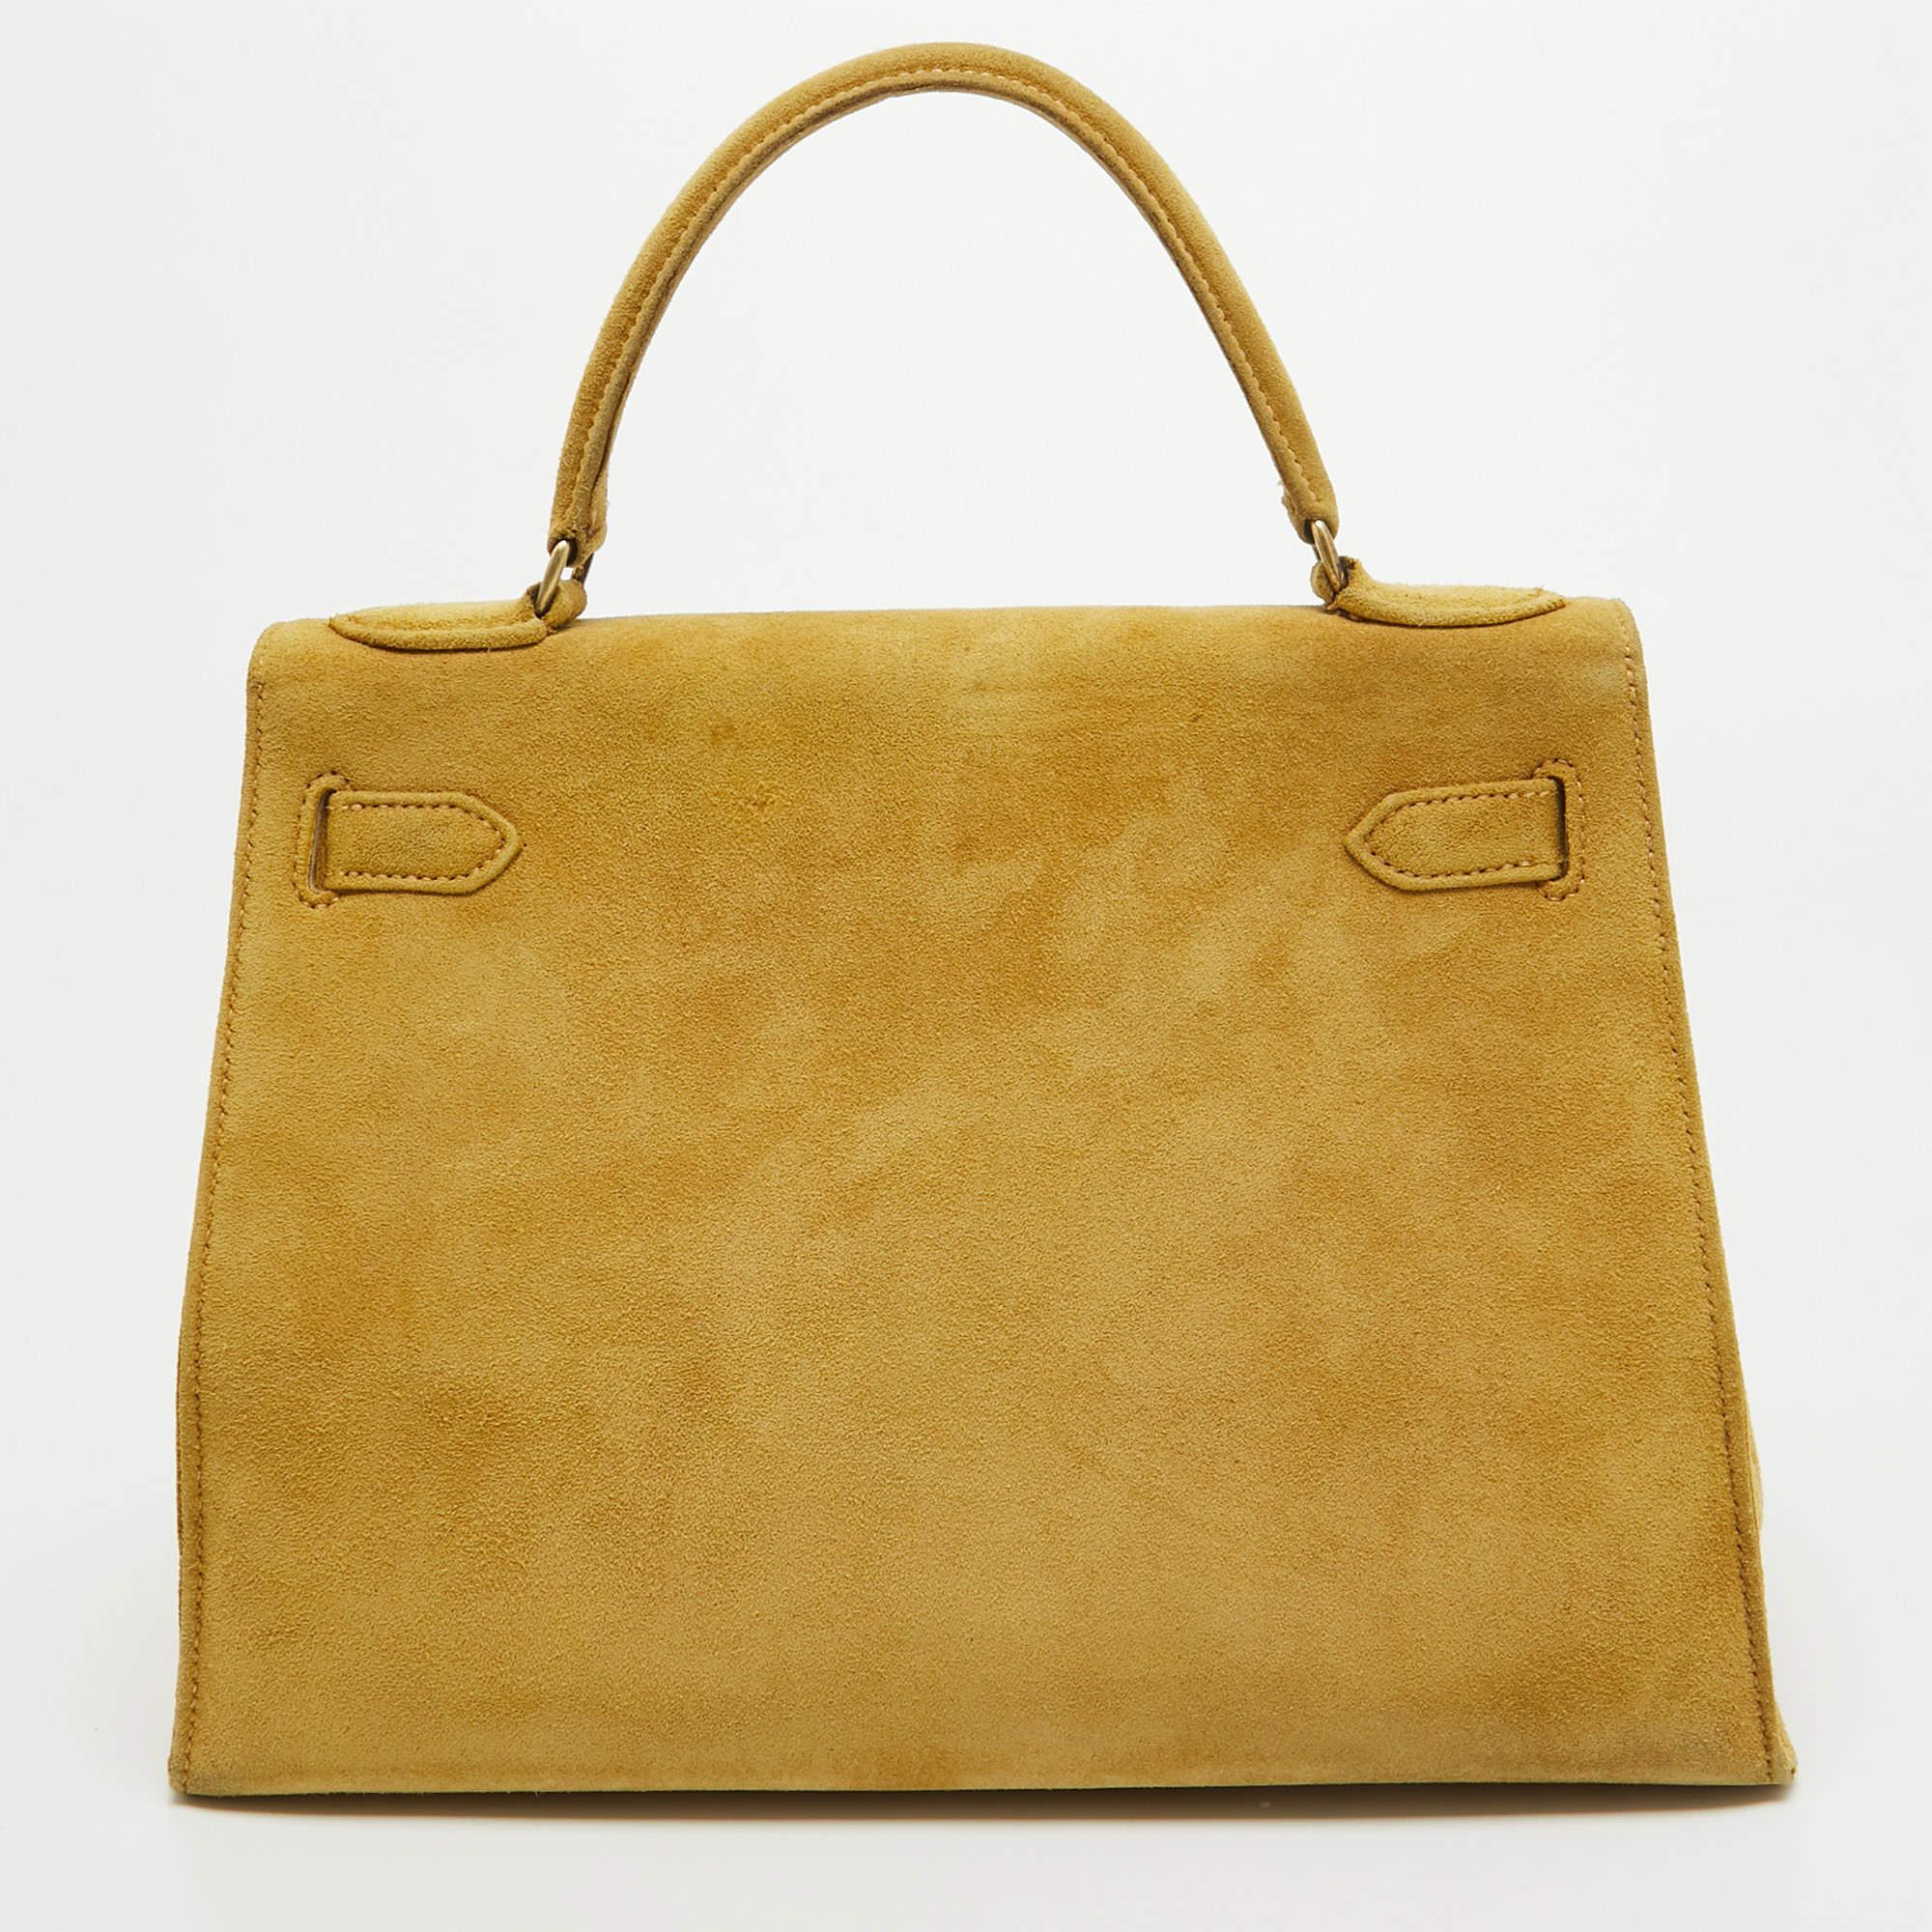 Words fall short of describing this treasure of a find from Hermes. It is a vintage Kelly bag that's over 50 years old. The color is stunning, and the size is perfect to hold your essentials comfortably. Carefully hand-stitched to perfection, this